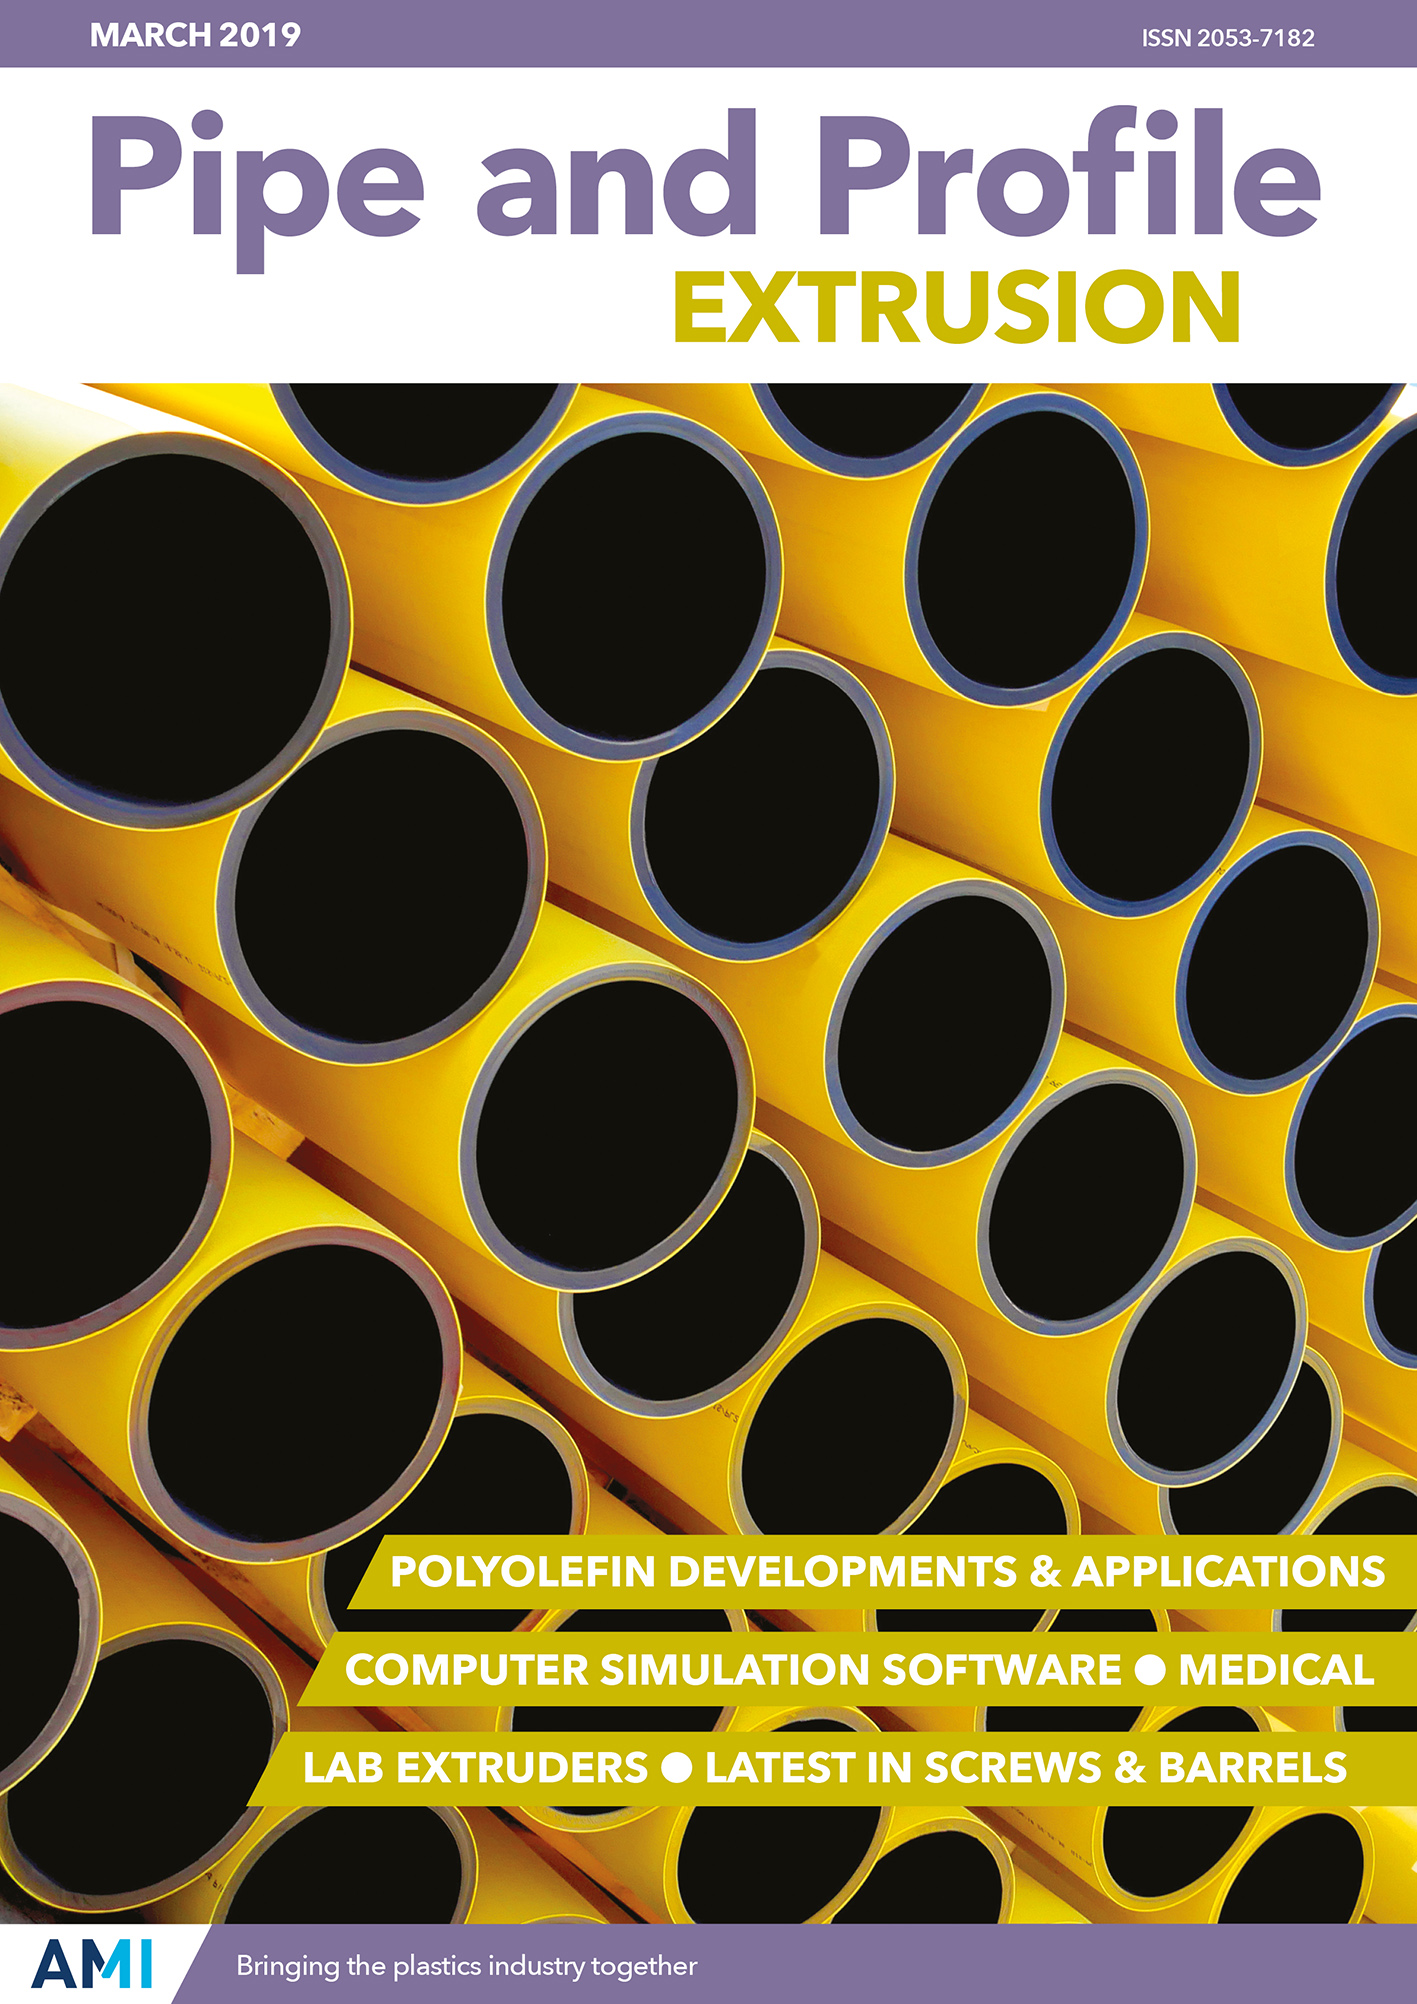 Pipe and Profile Extrusion March 2019